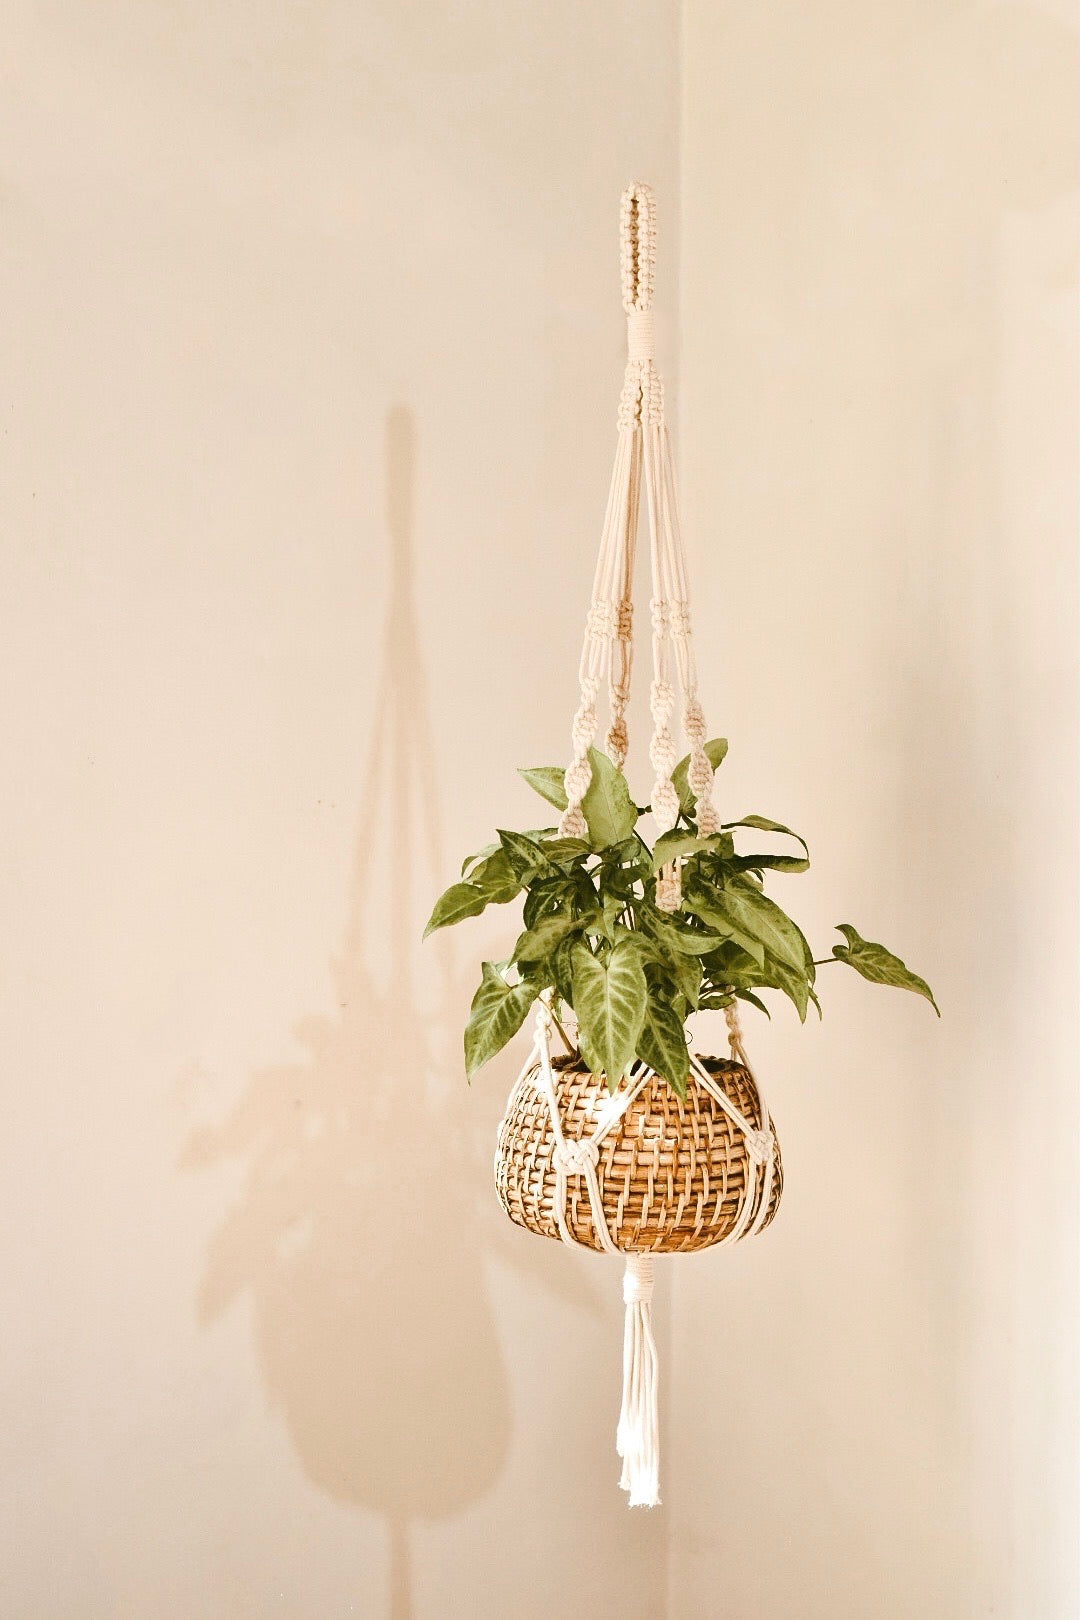 Cane Planters With Macrame Hangers - Set of 3 - Planter - soiled.in